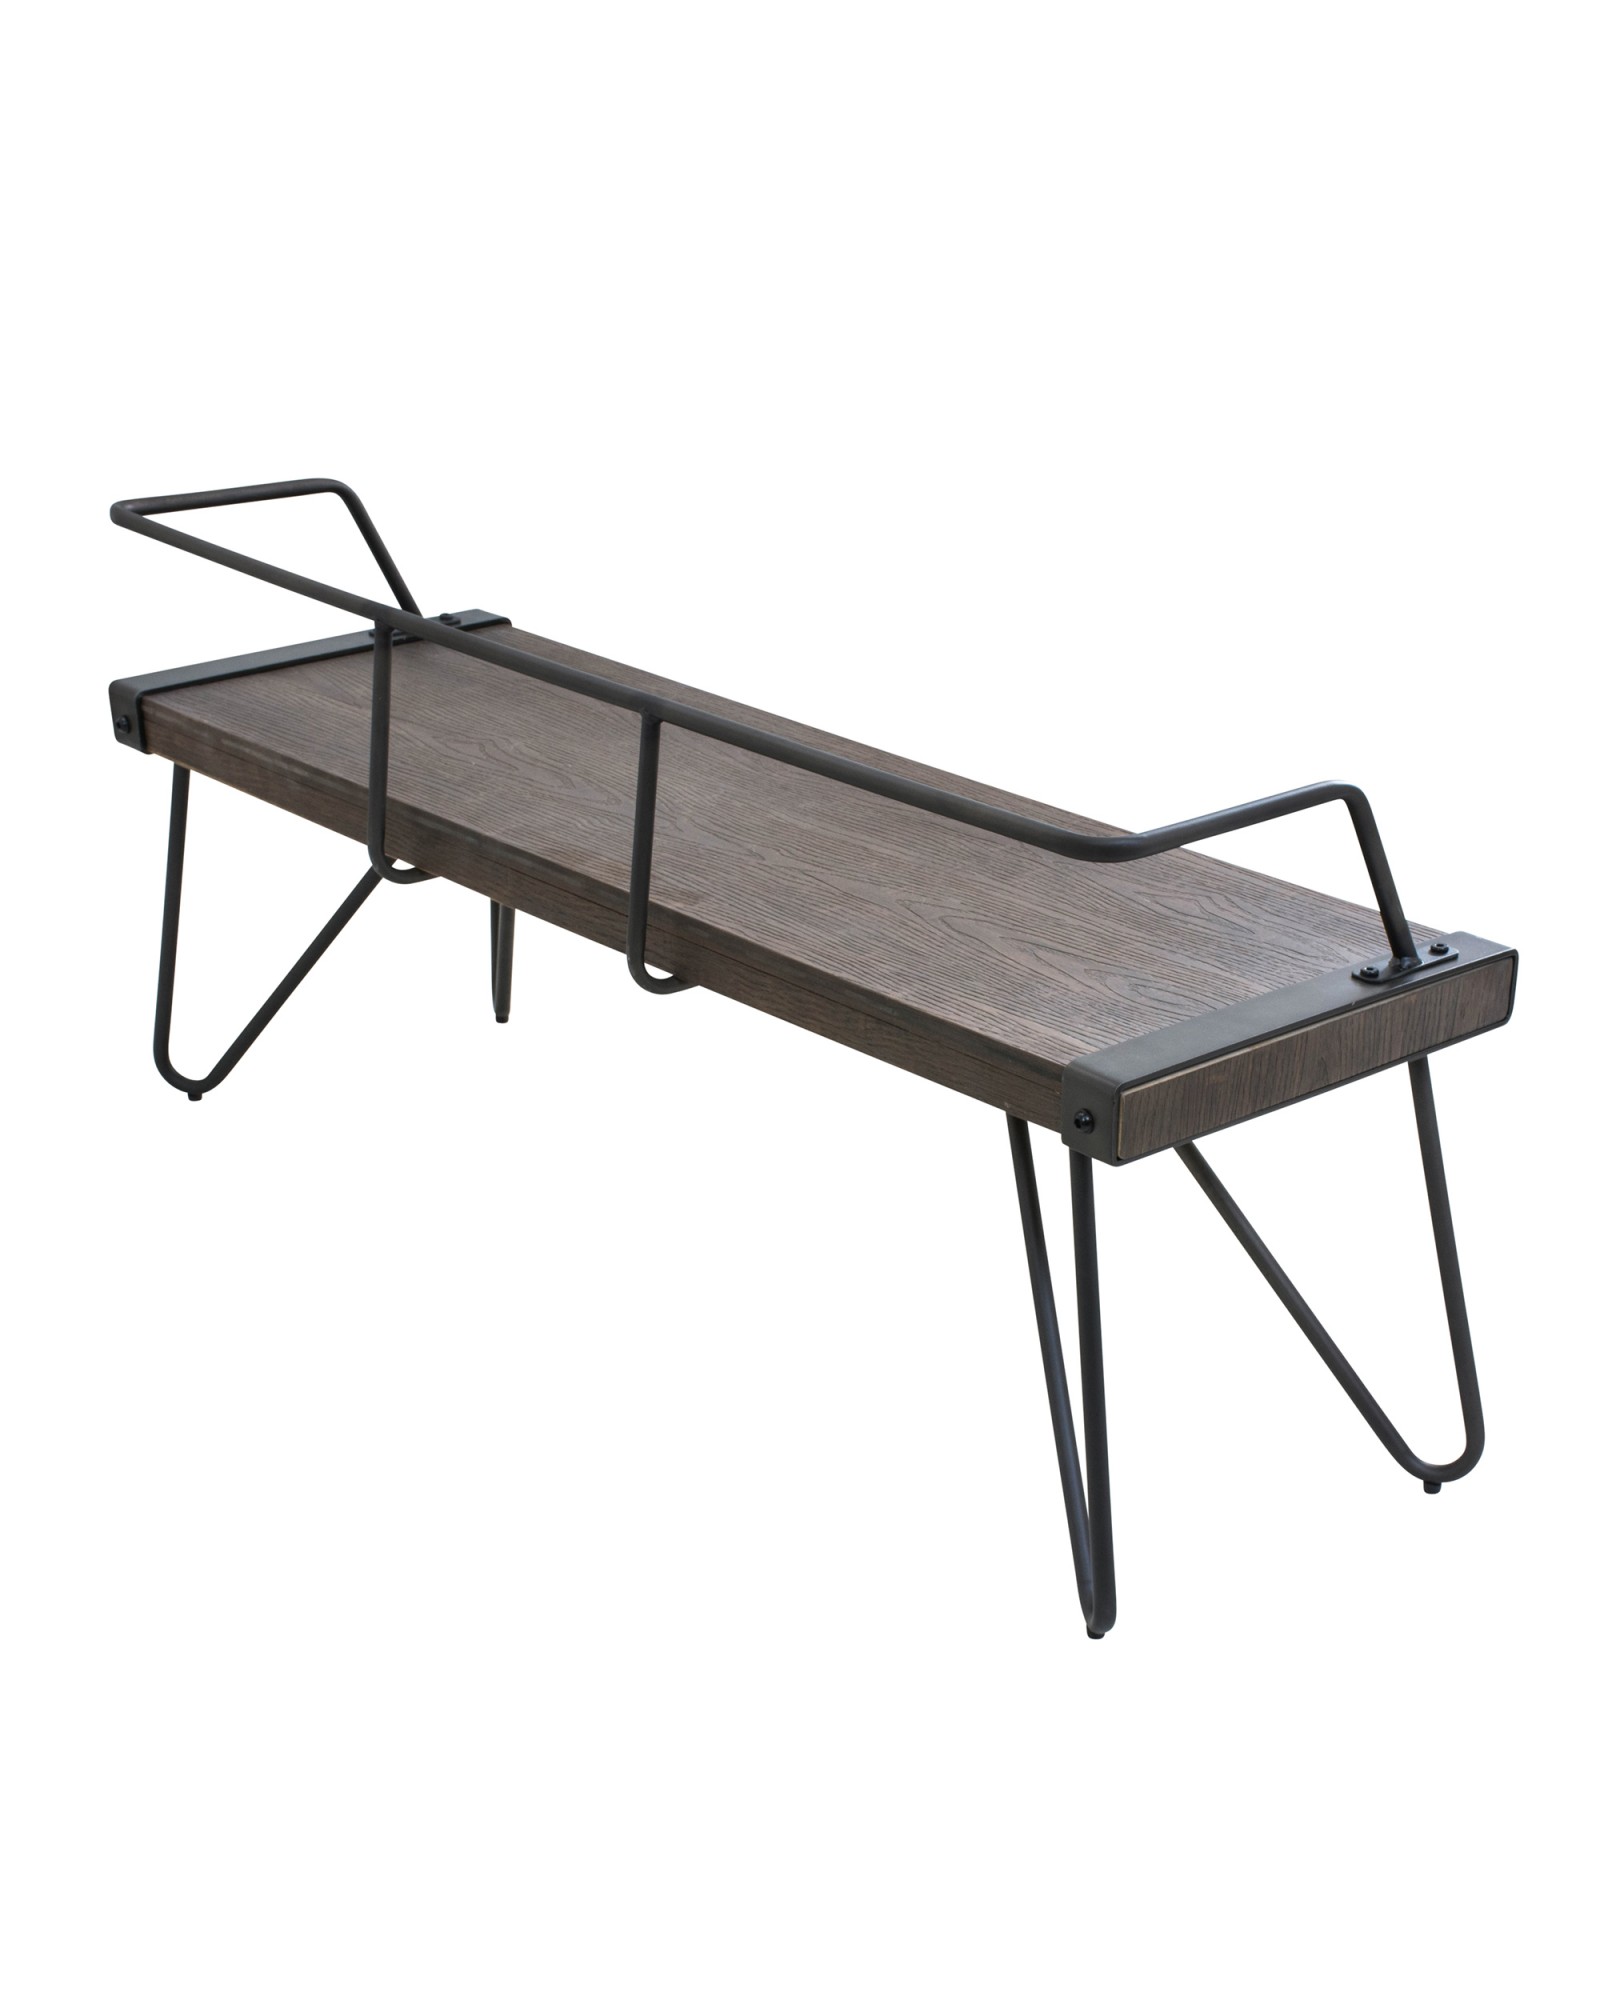 Stefani Industrial Bench in Antique and Walnut